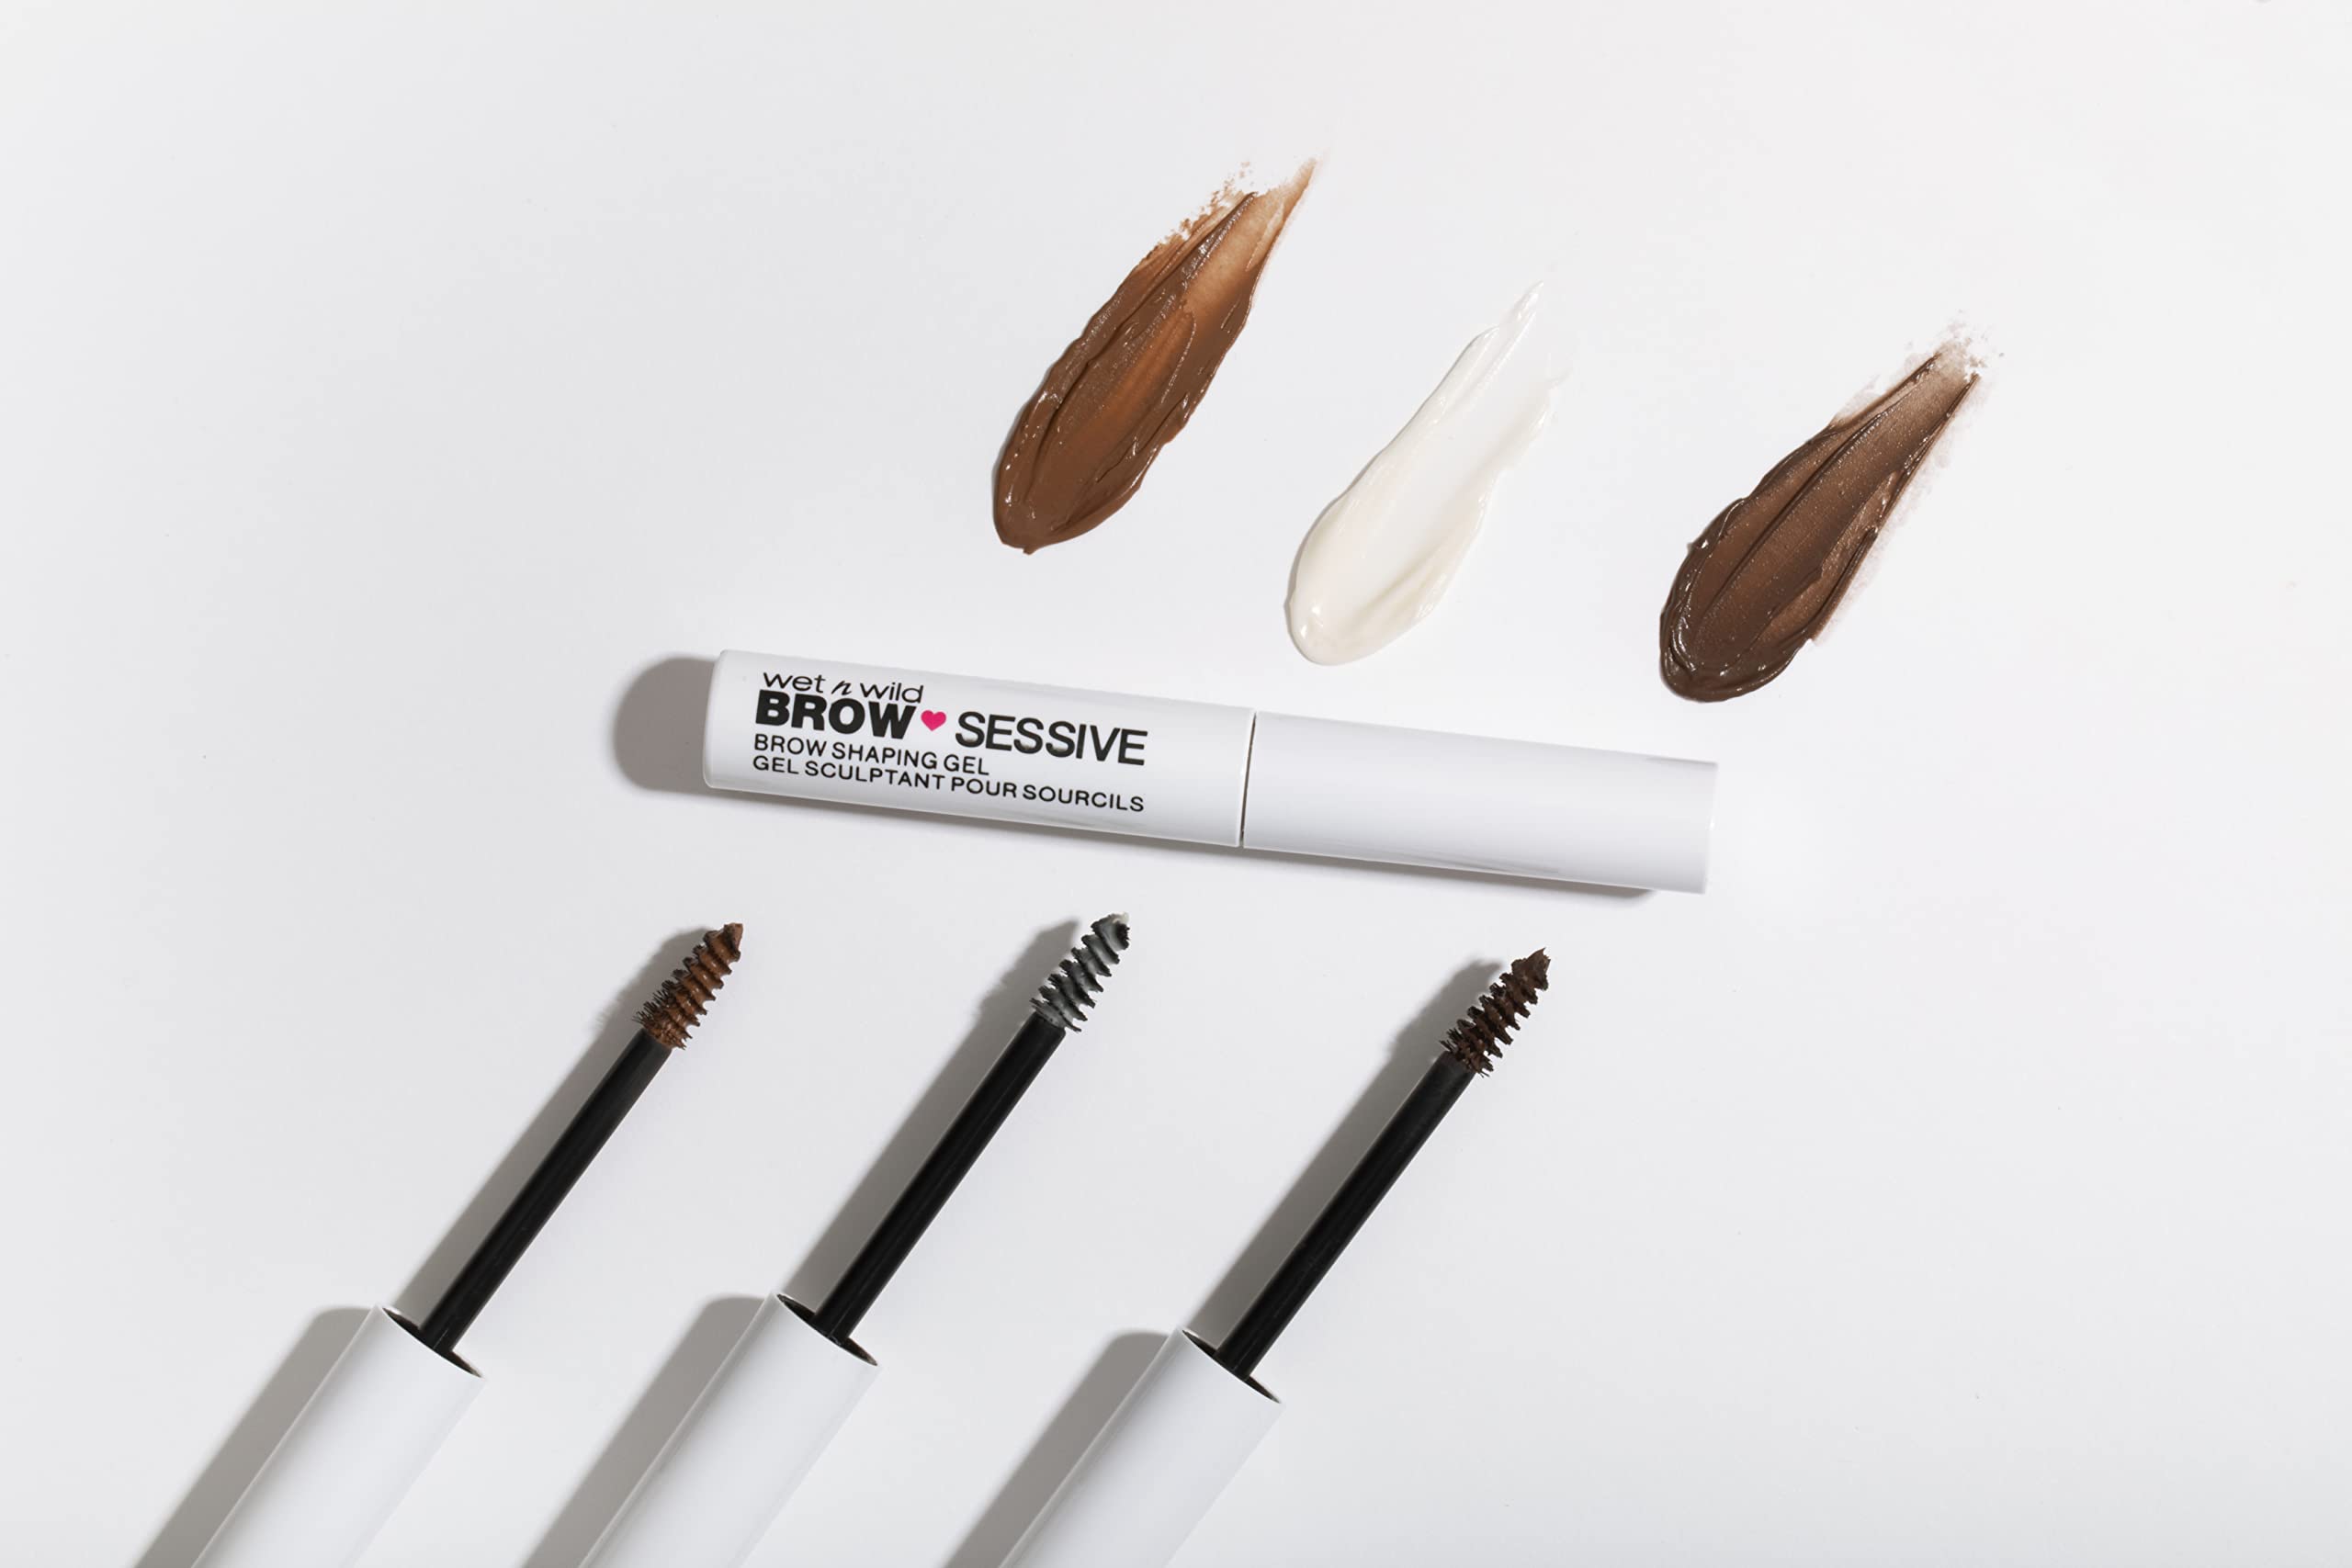 Wet n Wild Brow-Sessive Brow Shaping Gel Clear